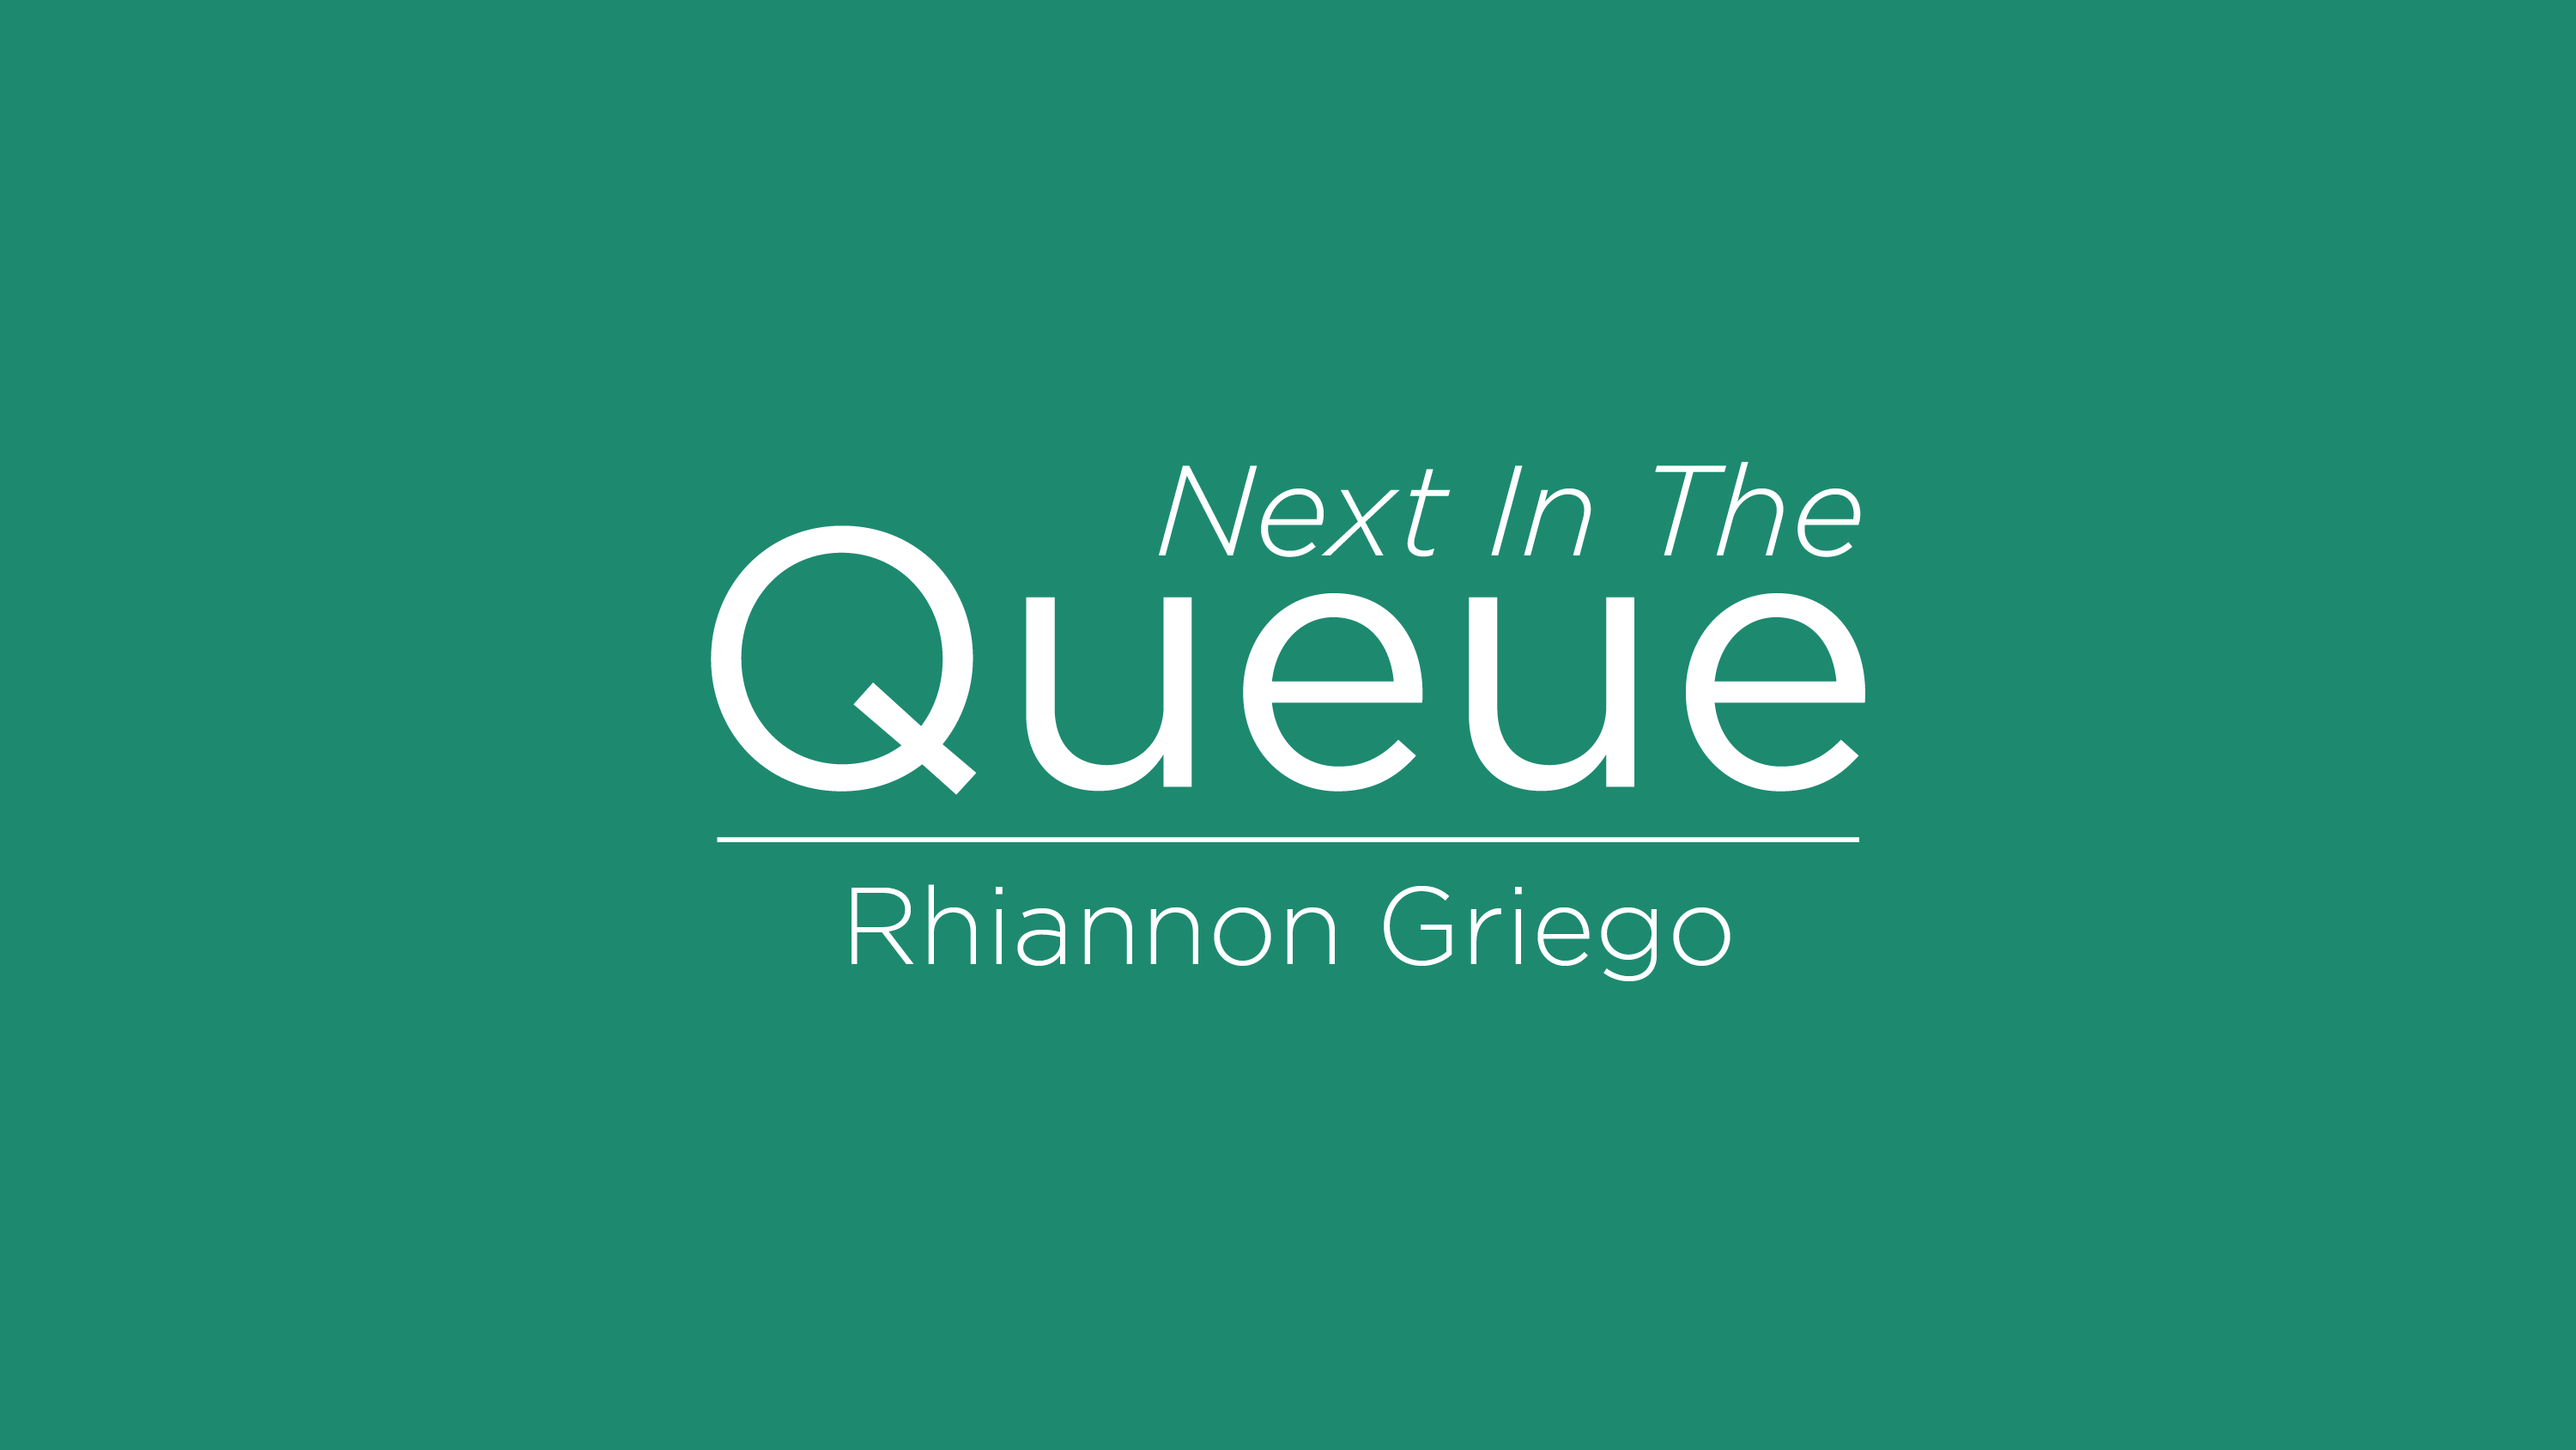 blog post cover graphic for The Queue featuring Rhiannon Griego